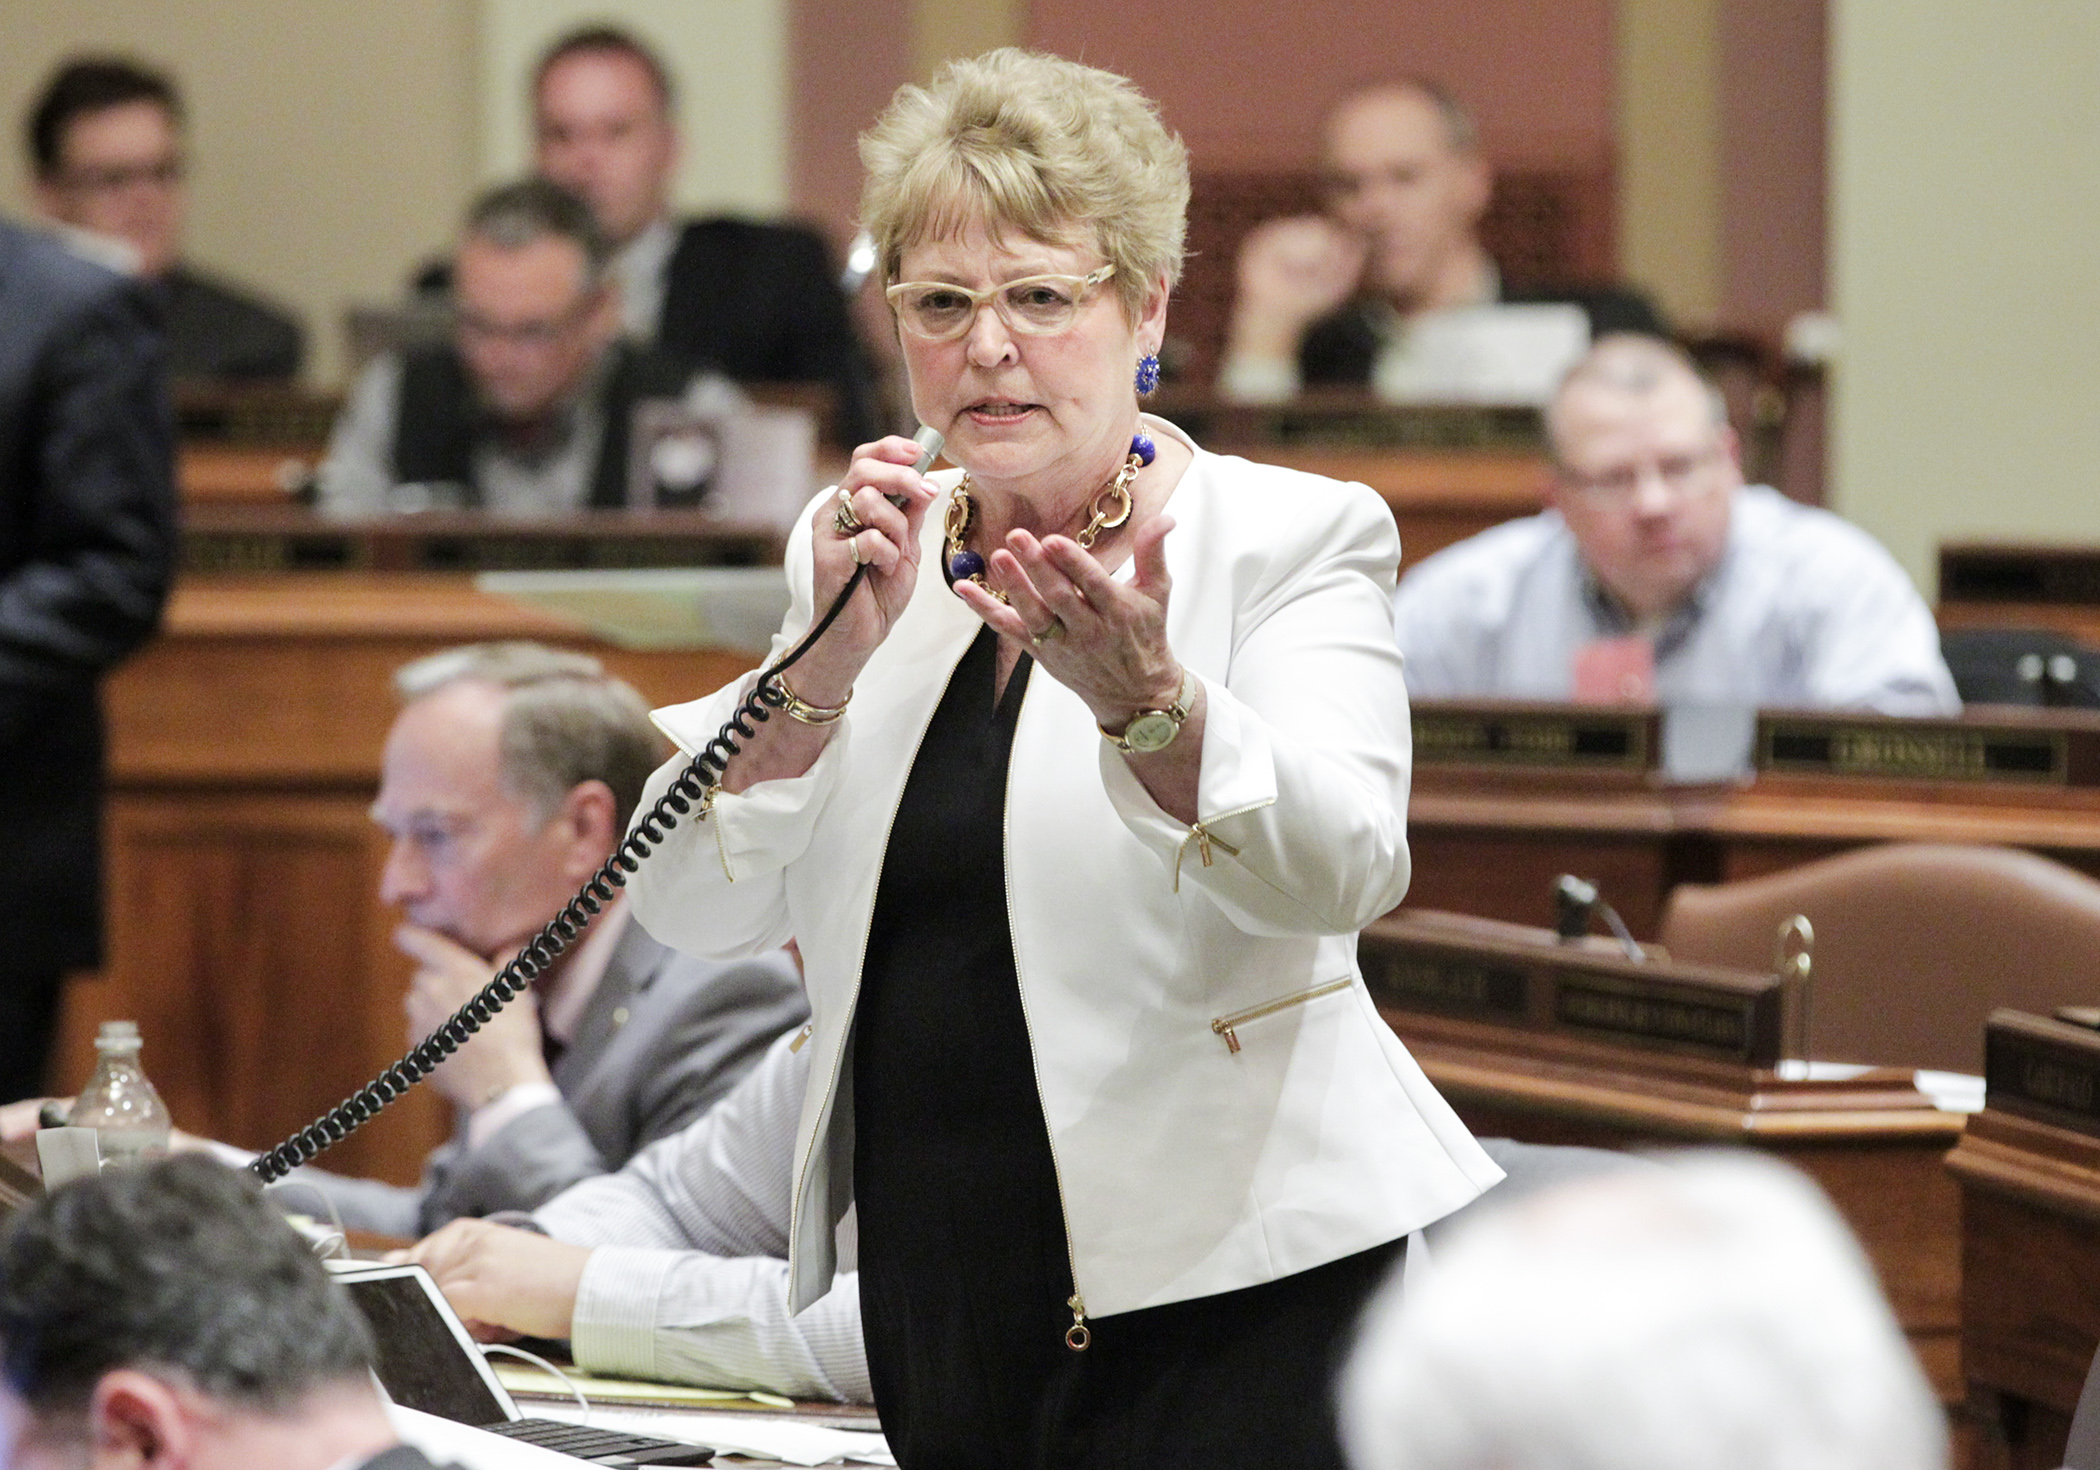 Rep. Sondra Erickson makes final comments during May 16 floor debate on the conference committee report on HF140/SF4, which would overhaul the teacher licensure system. Photo by Paul Battaglia